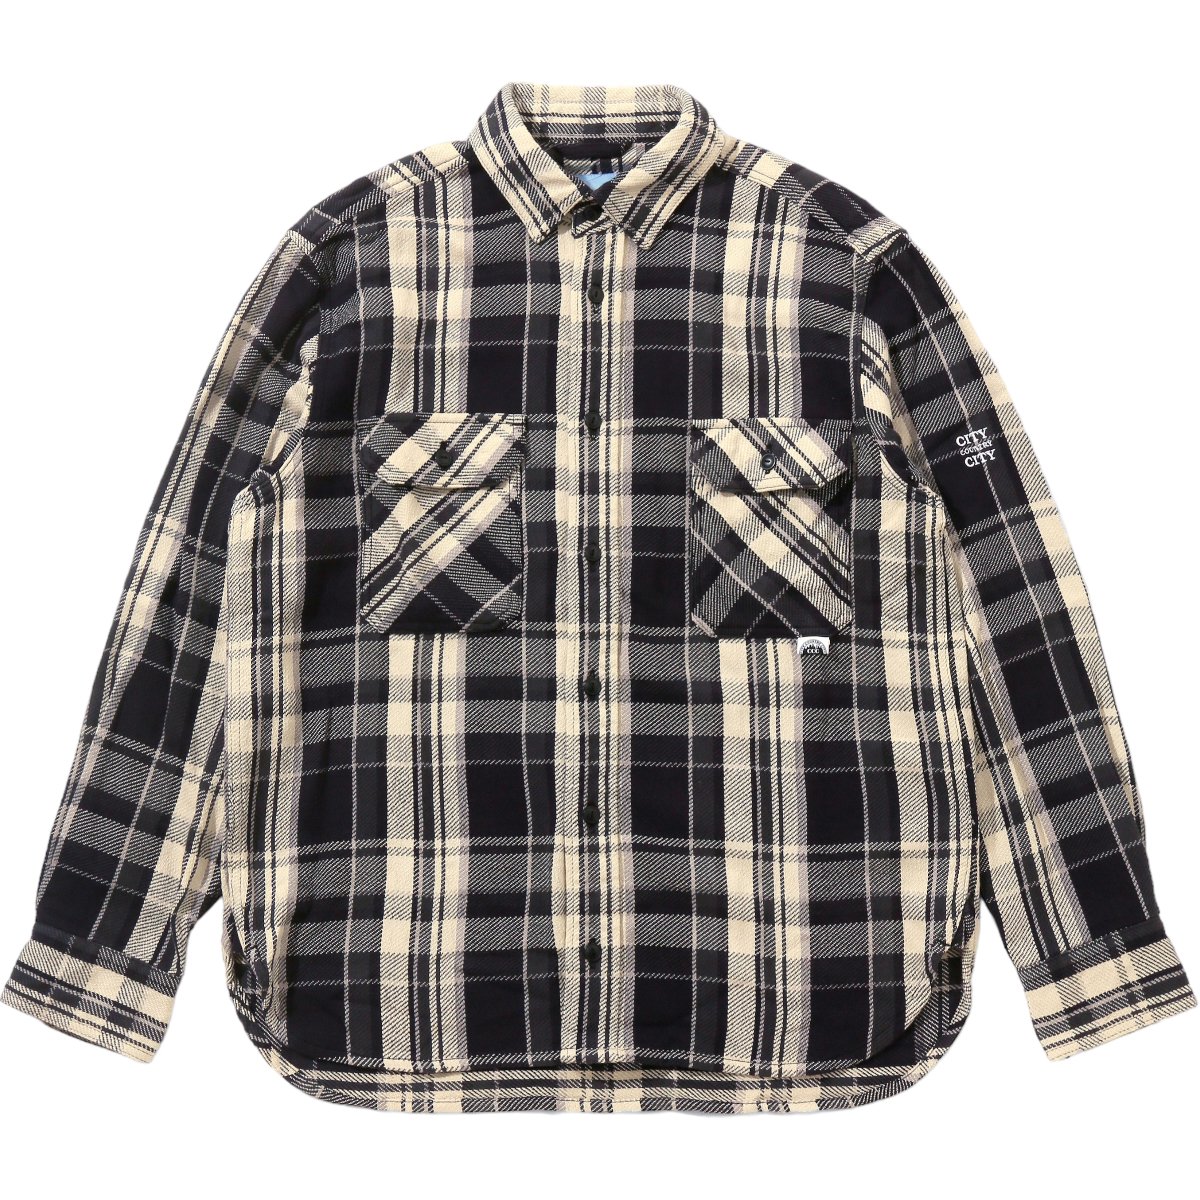 CITY COUNTRY CITY<BR>EMBROIDERED LOGO COTTON TWILL CHECK SHIRT